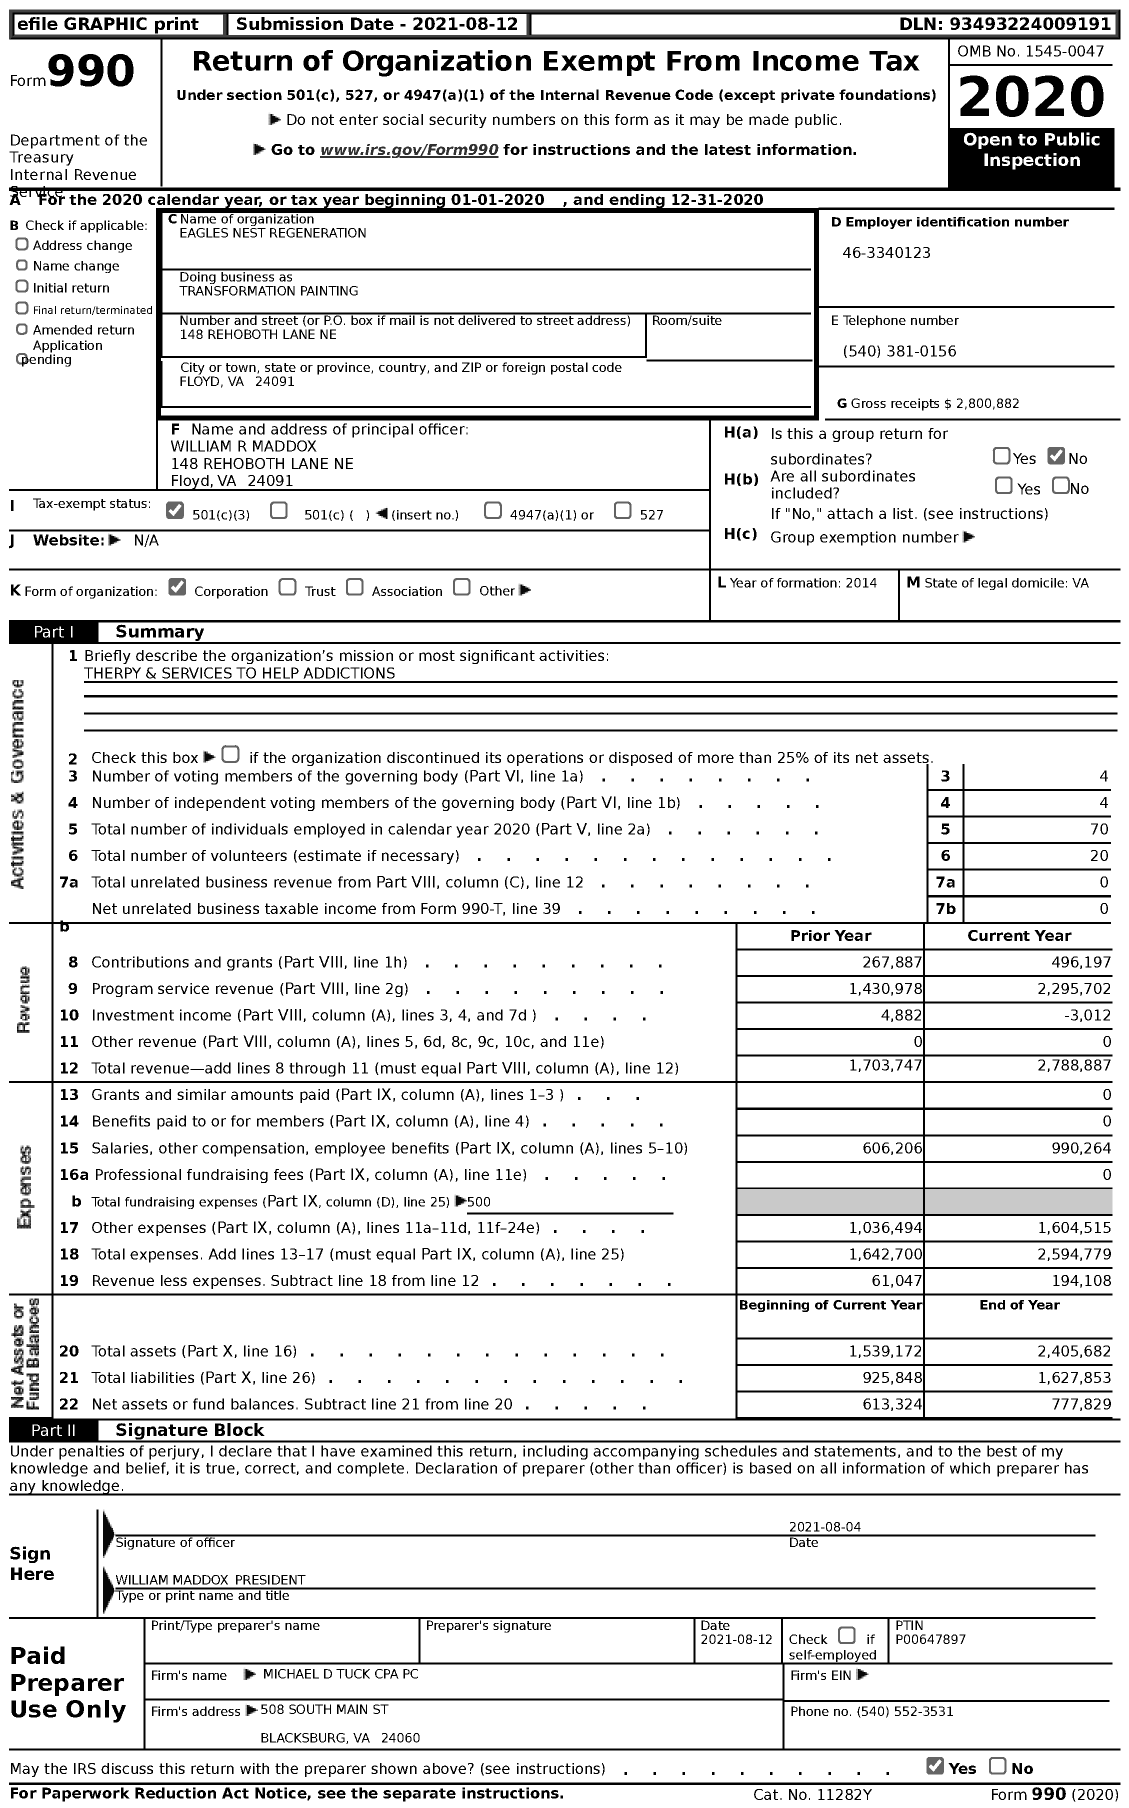 Image of first page of 2020 Form 990 for Eagles Nest Regeneration